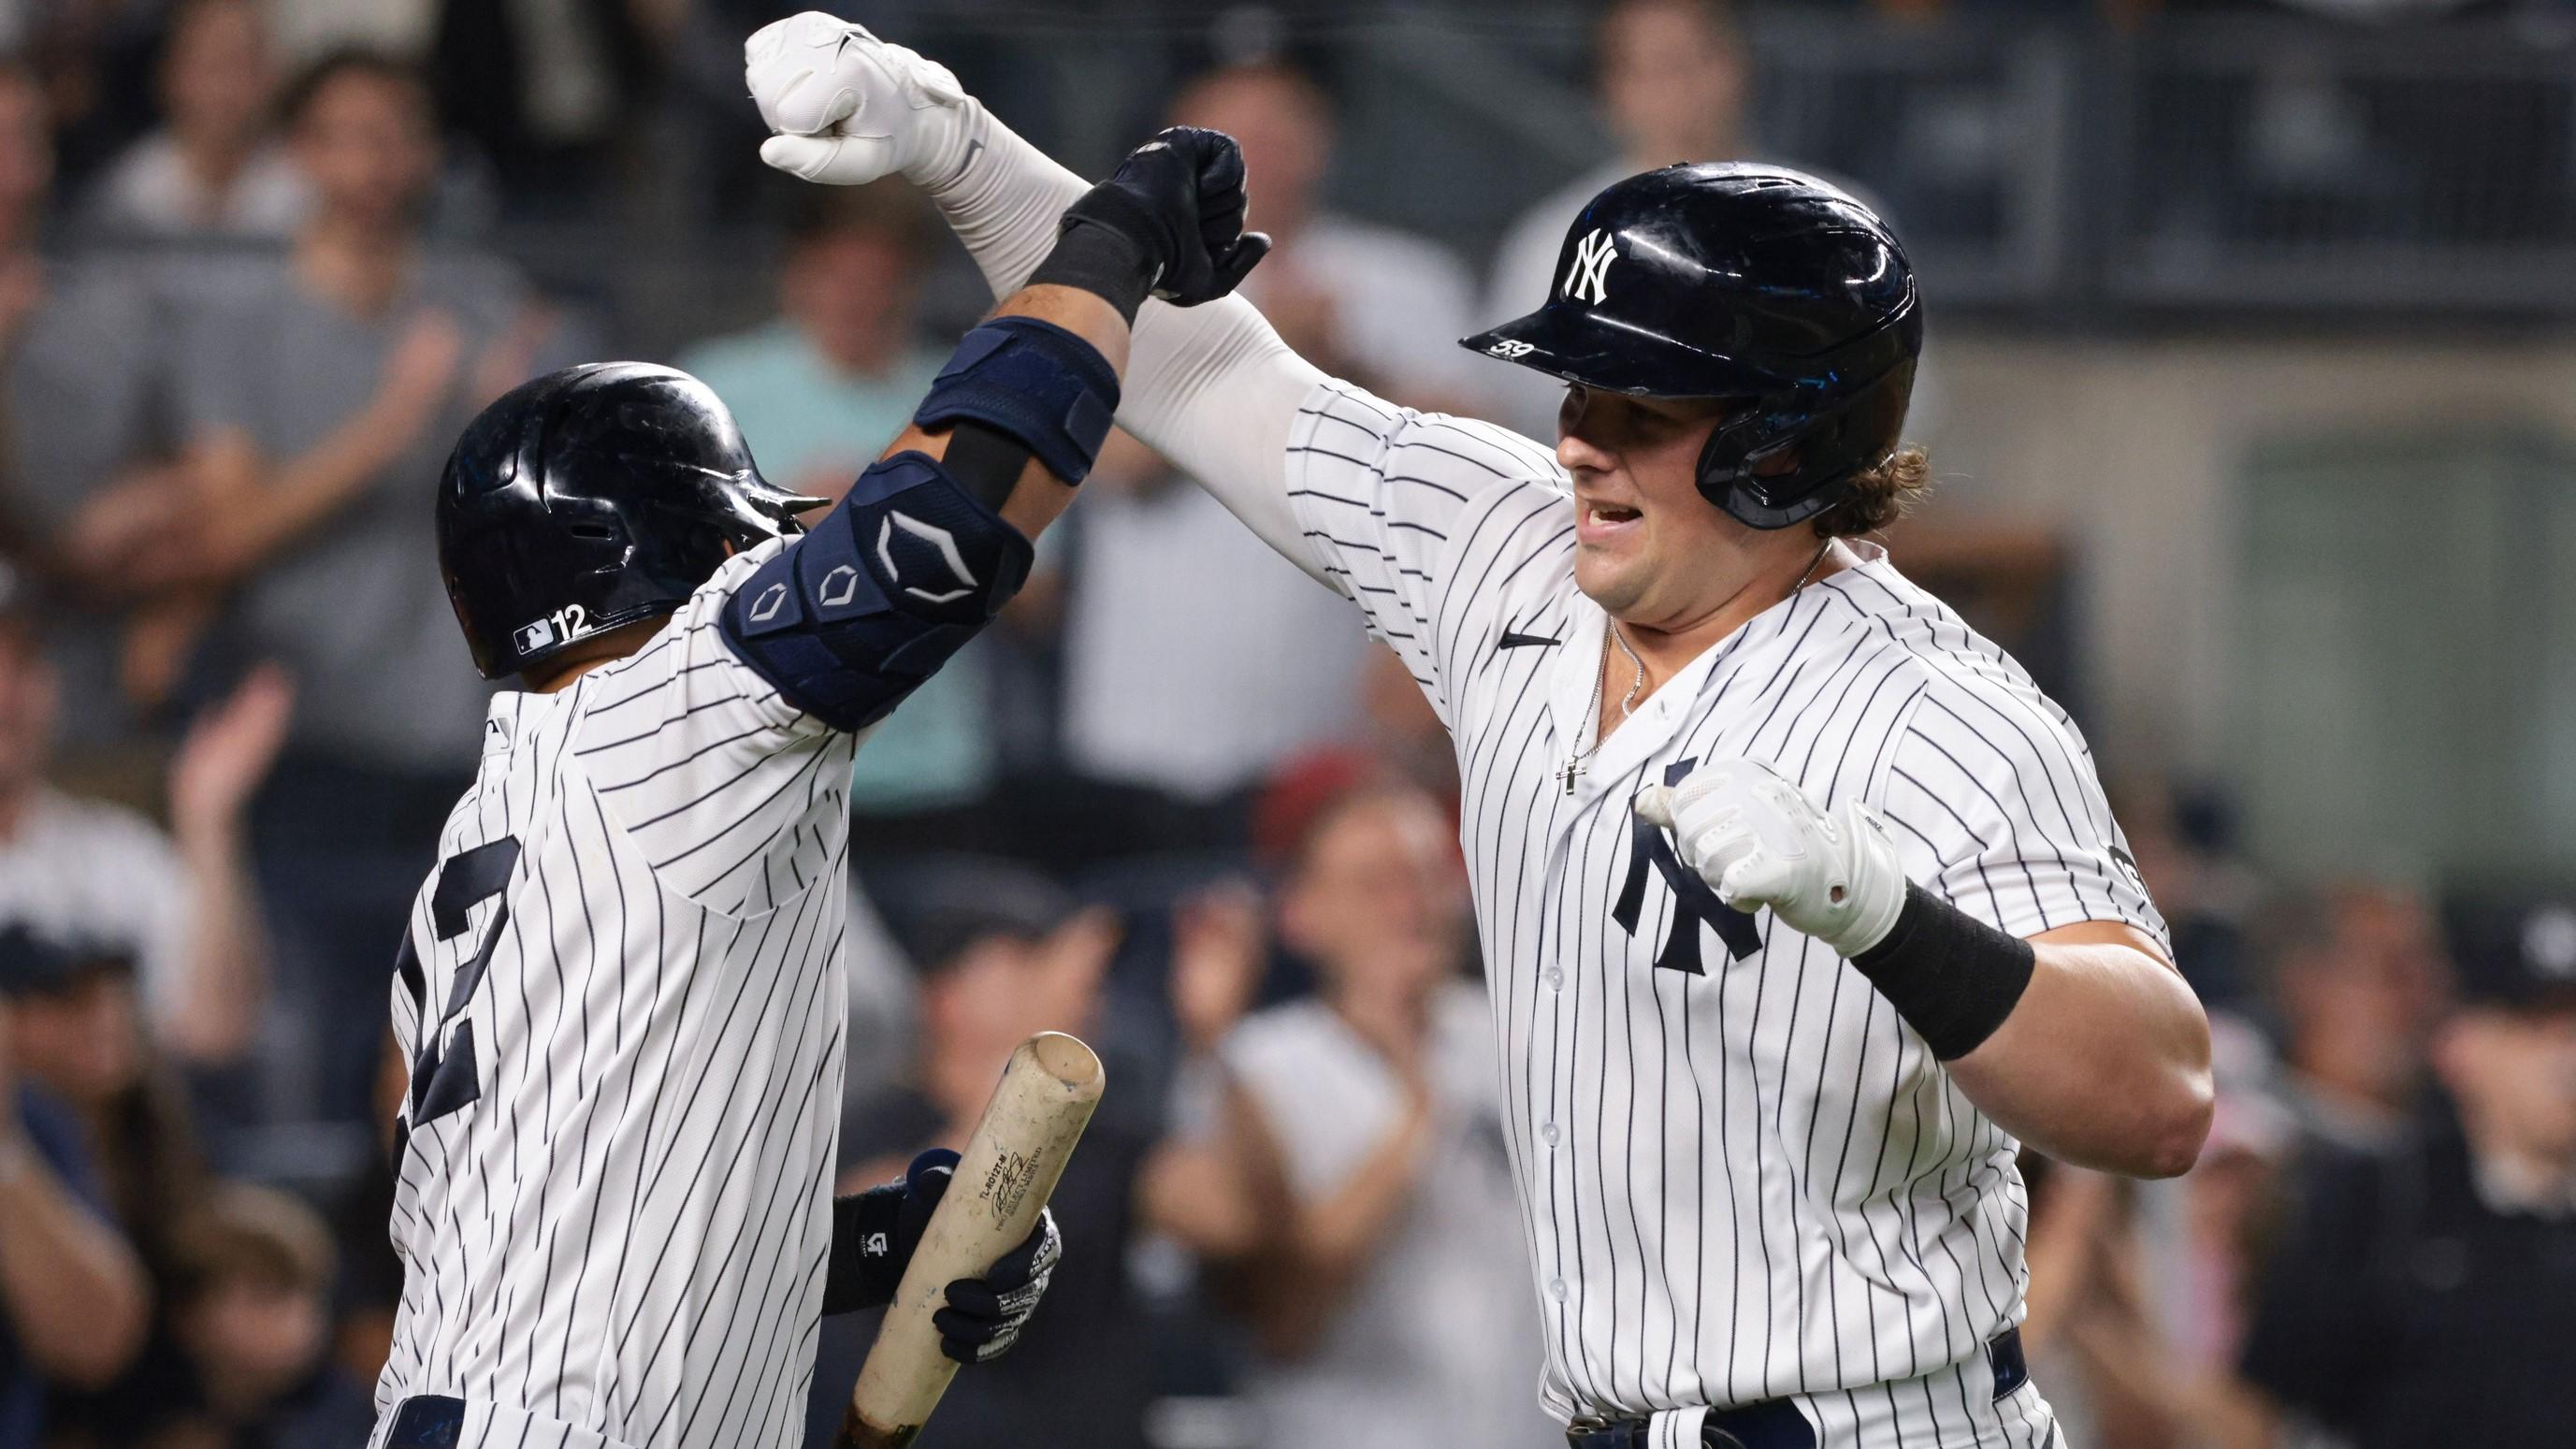 Aug 20, 2021; Bronx, New York, USA; New York Yankees first baseman Luke Voit (59) celebrates with second baseman Rougned Odor (12) after hitting a solo home run during the seventh inning against the Minnesota Twins at Yankee Stadium. / Vincent Carchietta-USA TODAY Sports